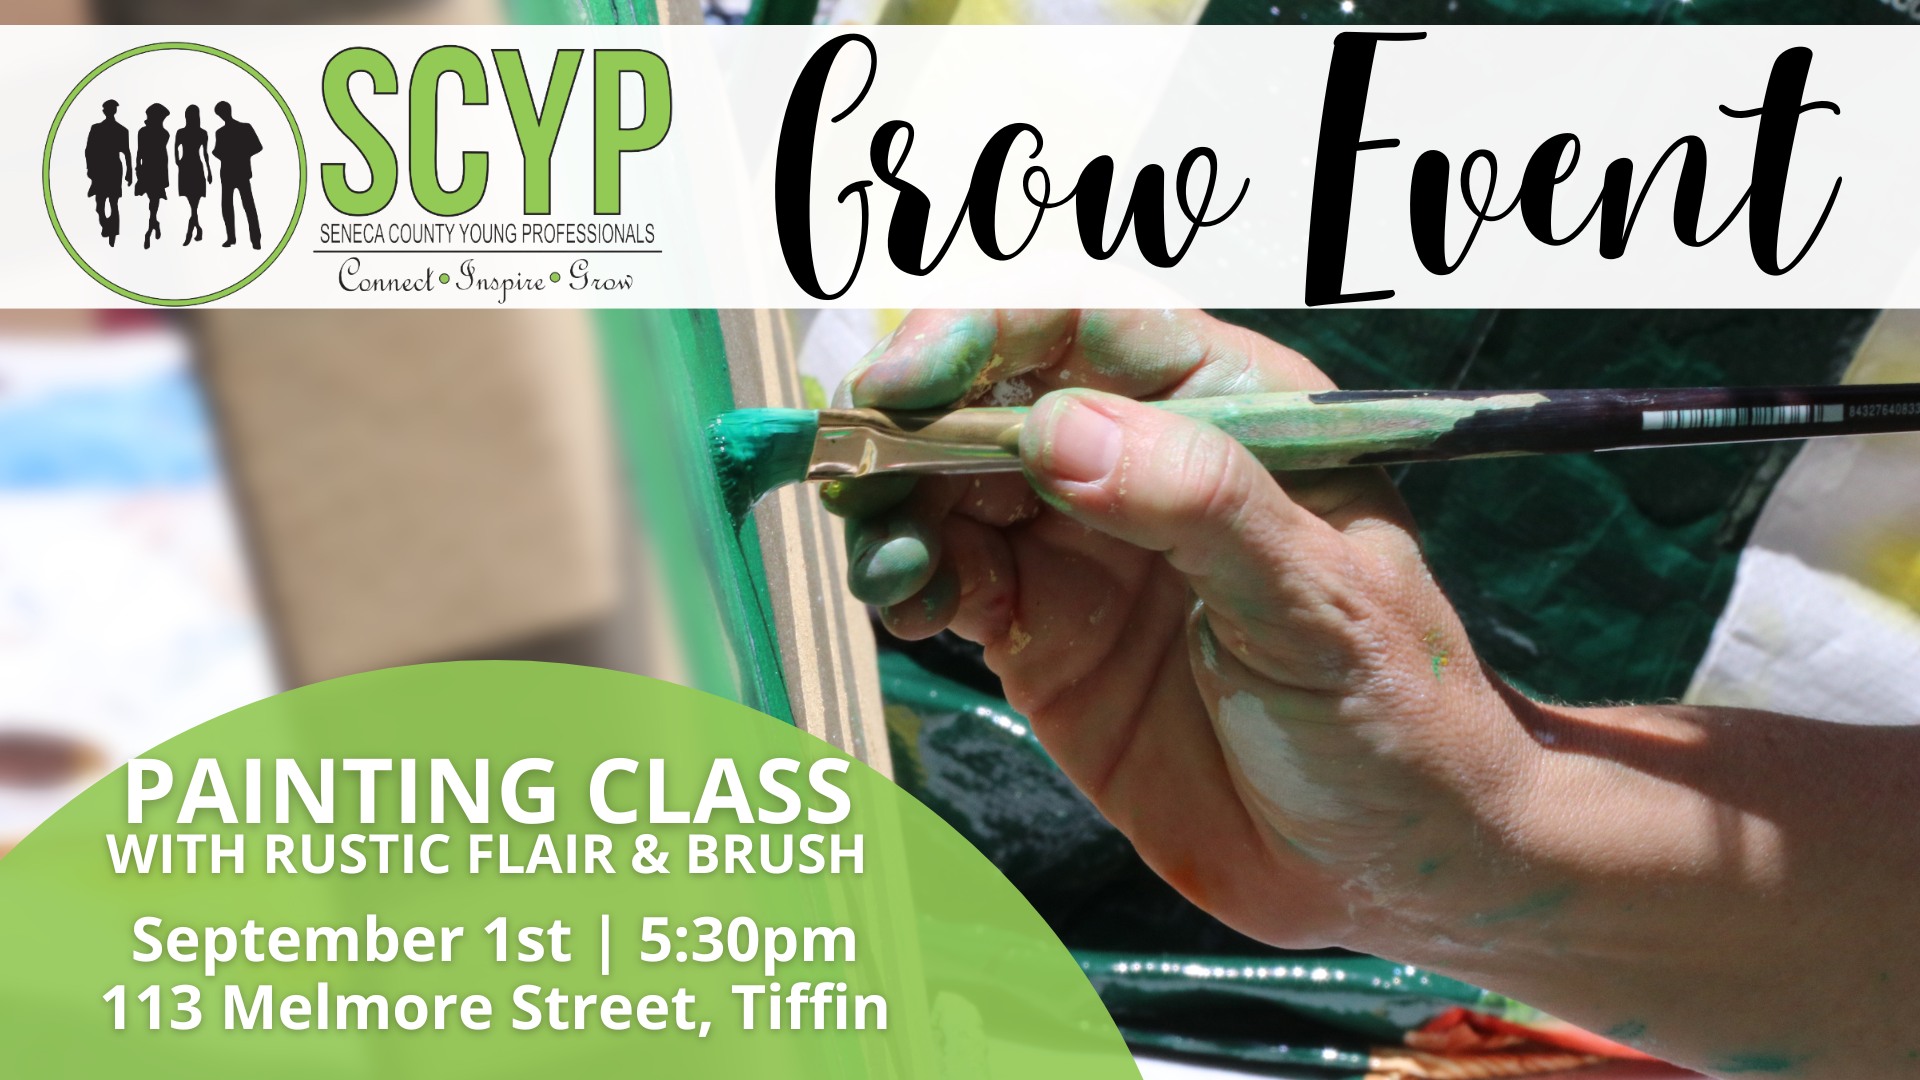 SCYP Grow Event | Painting Class with Rustic Flair & Brush